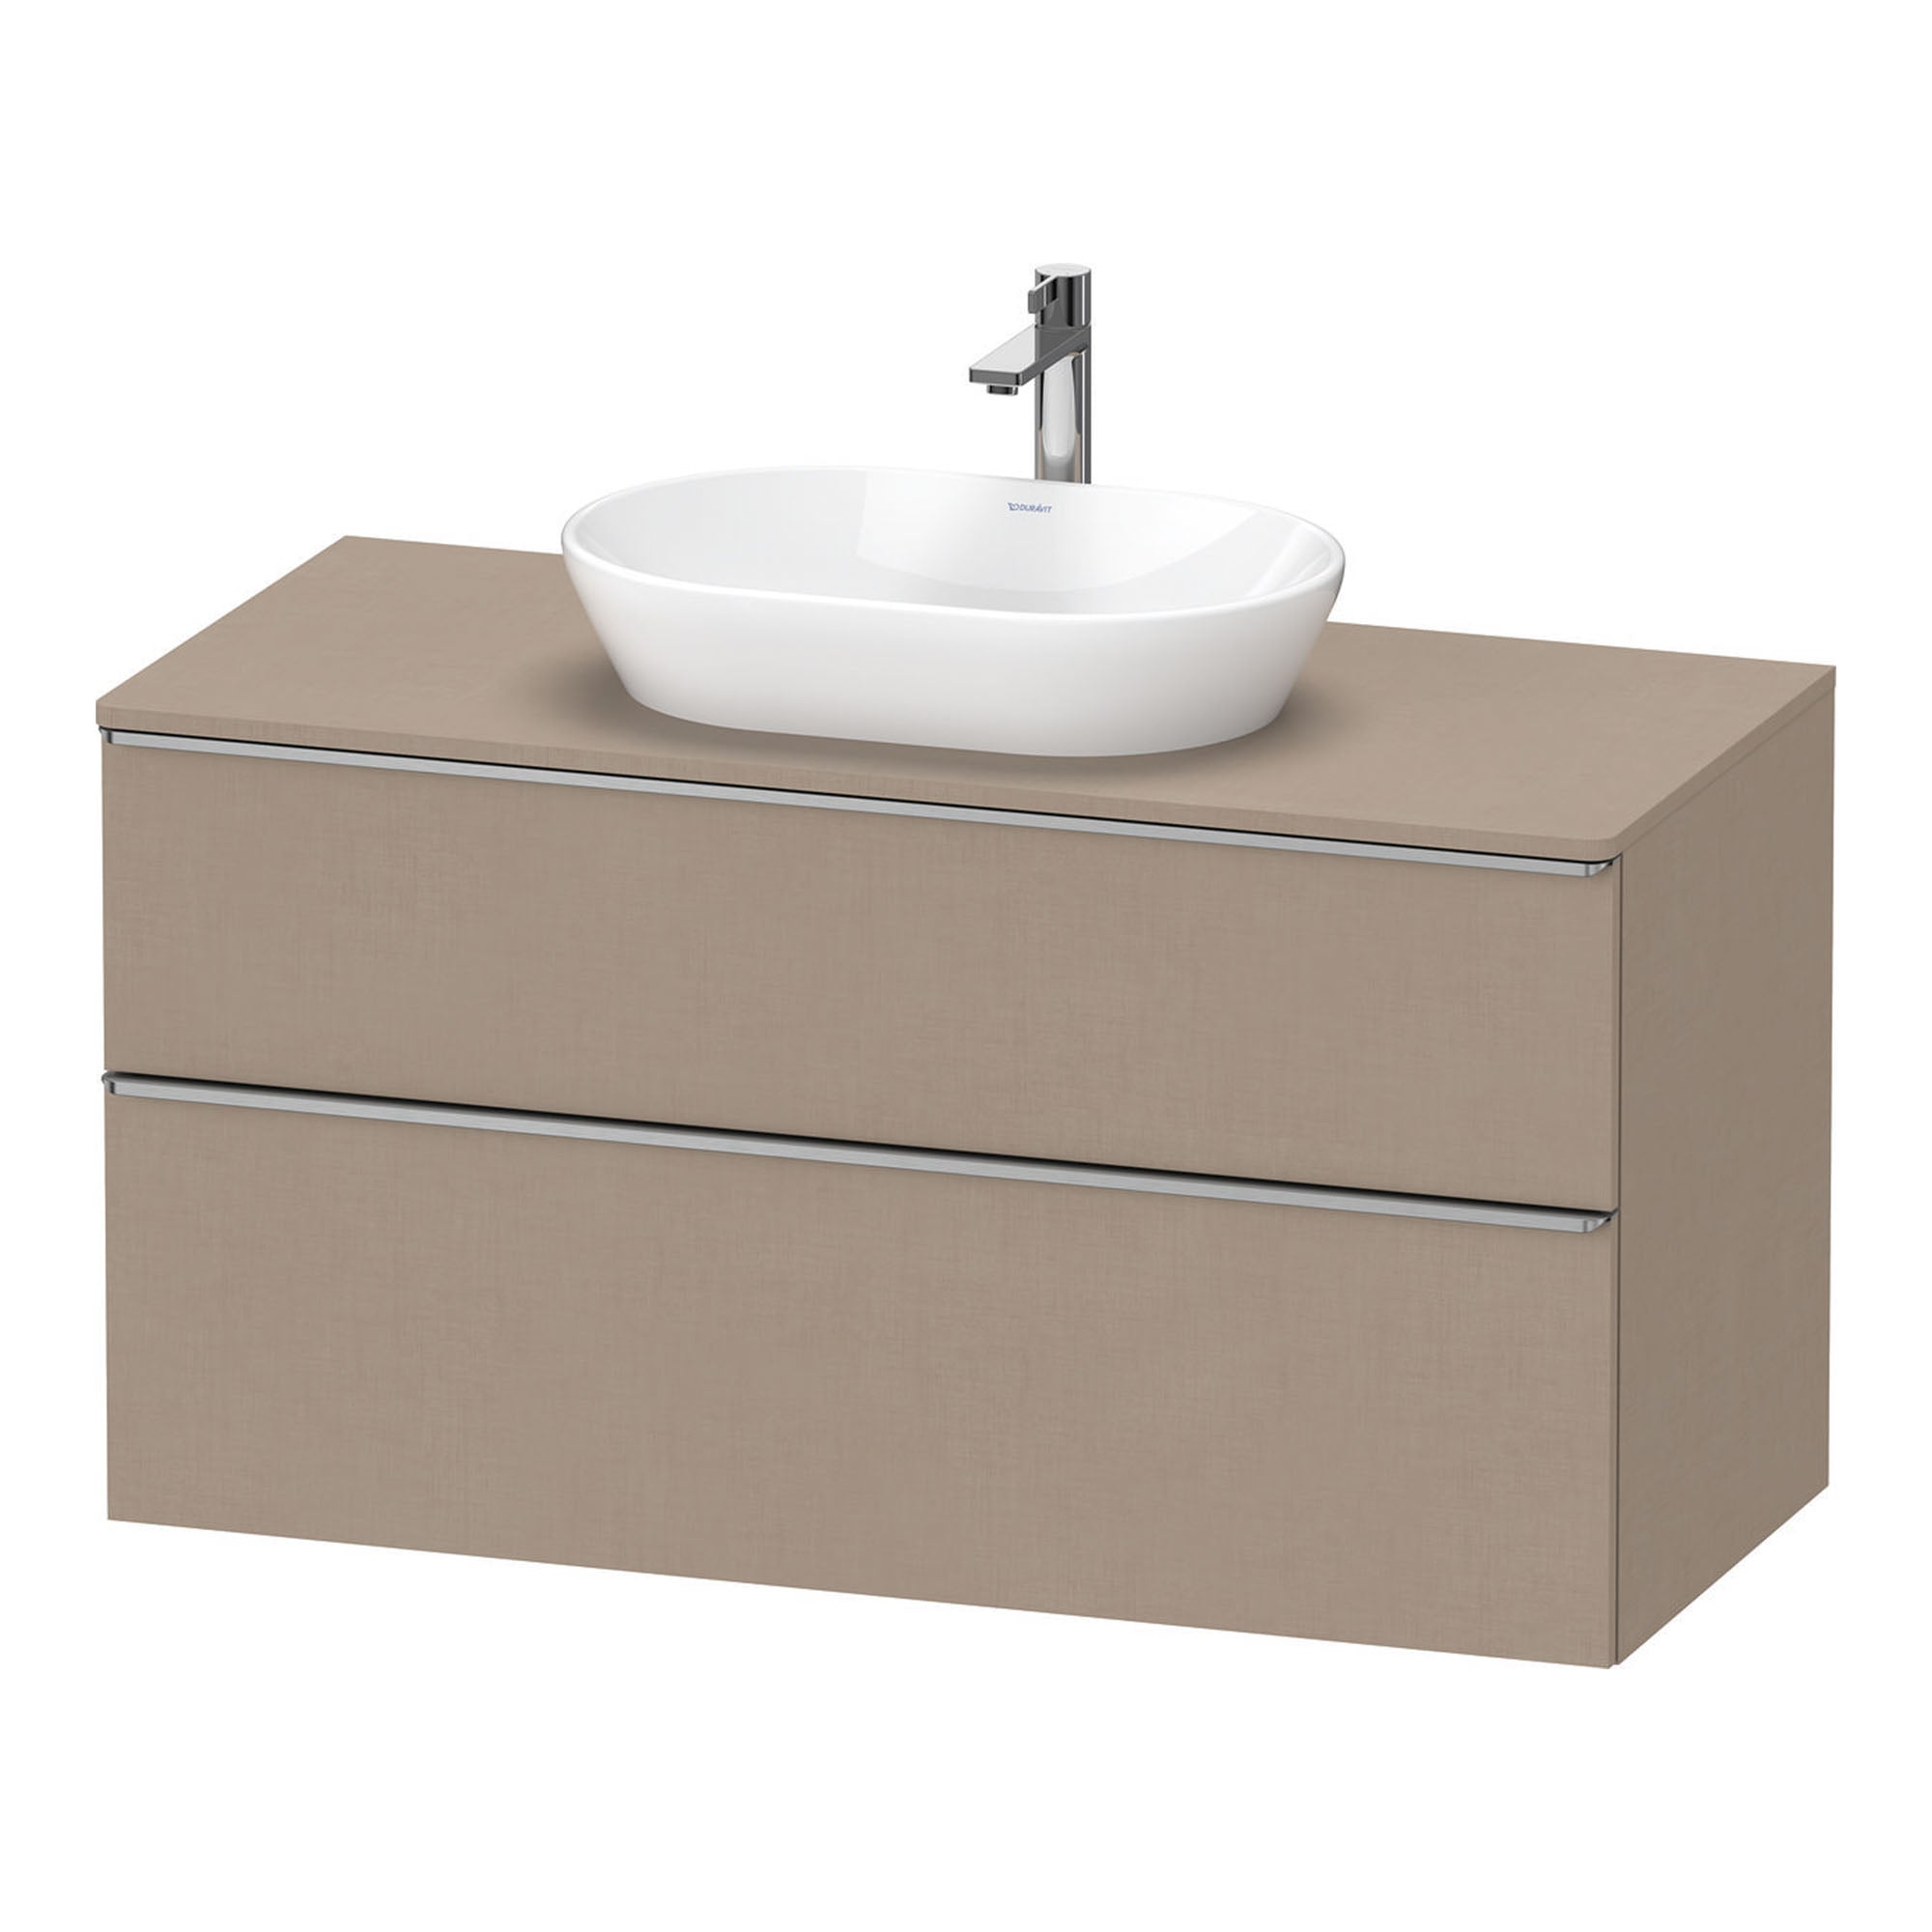 duravit d-neo 1200 wall mounted vanity unit with worktop linen stainless steel handles